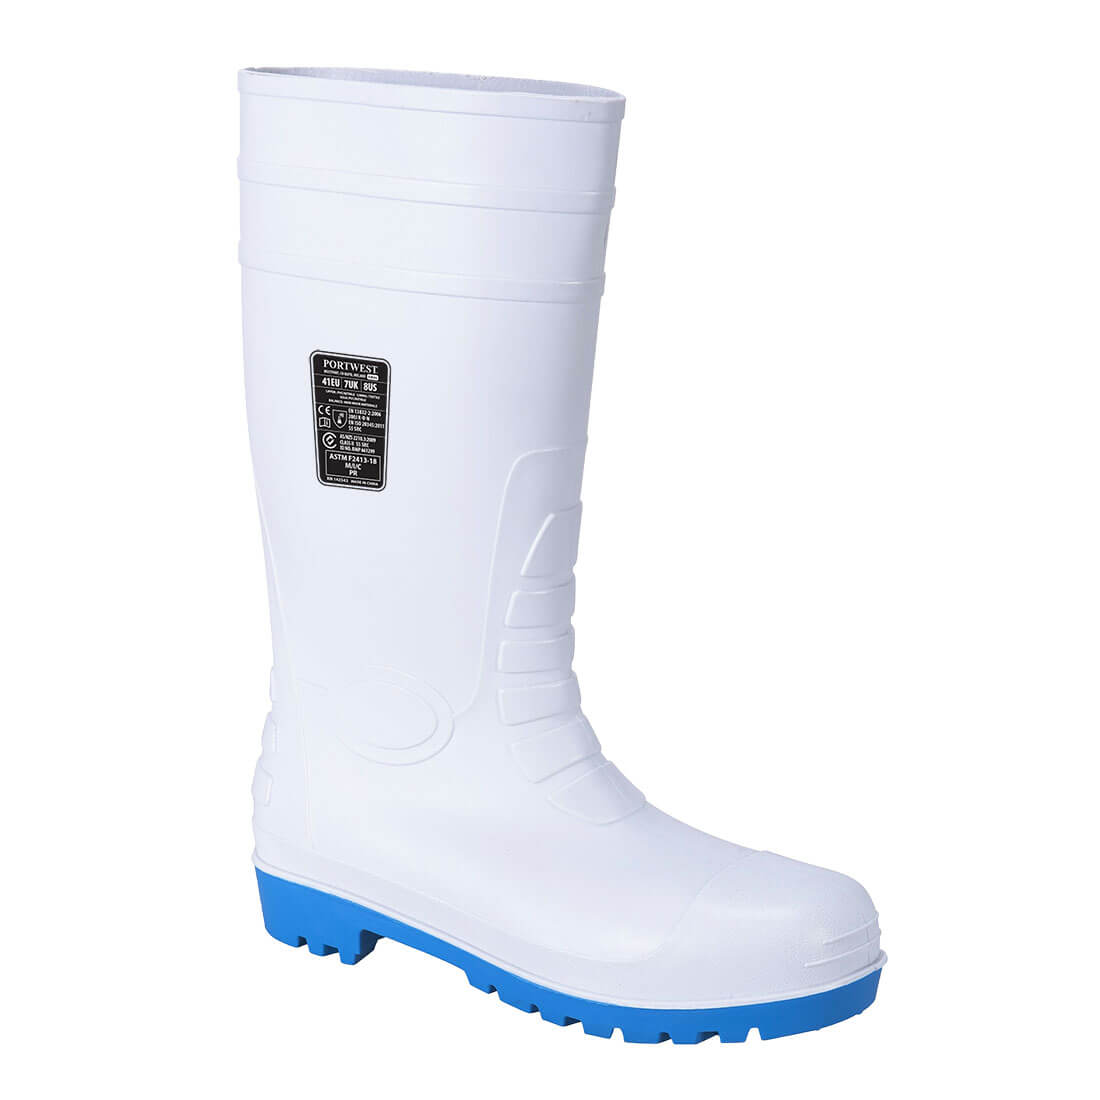 Total Safety Gumboot White - FW95 Front